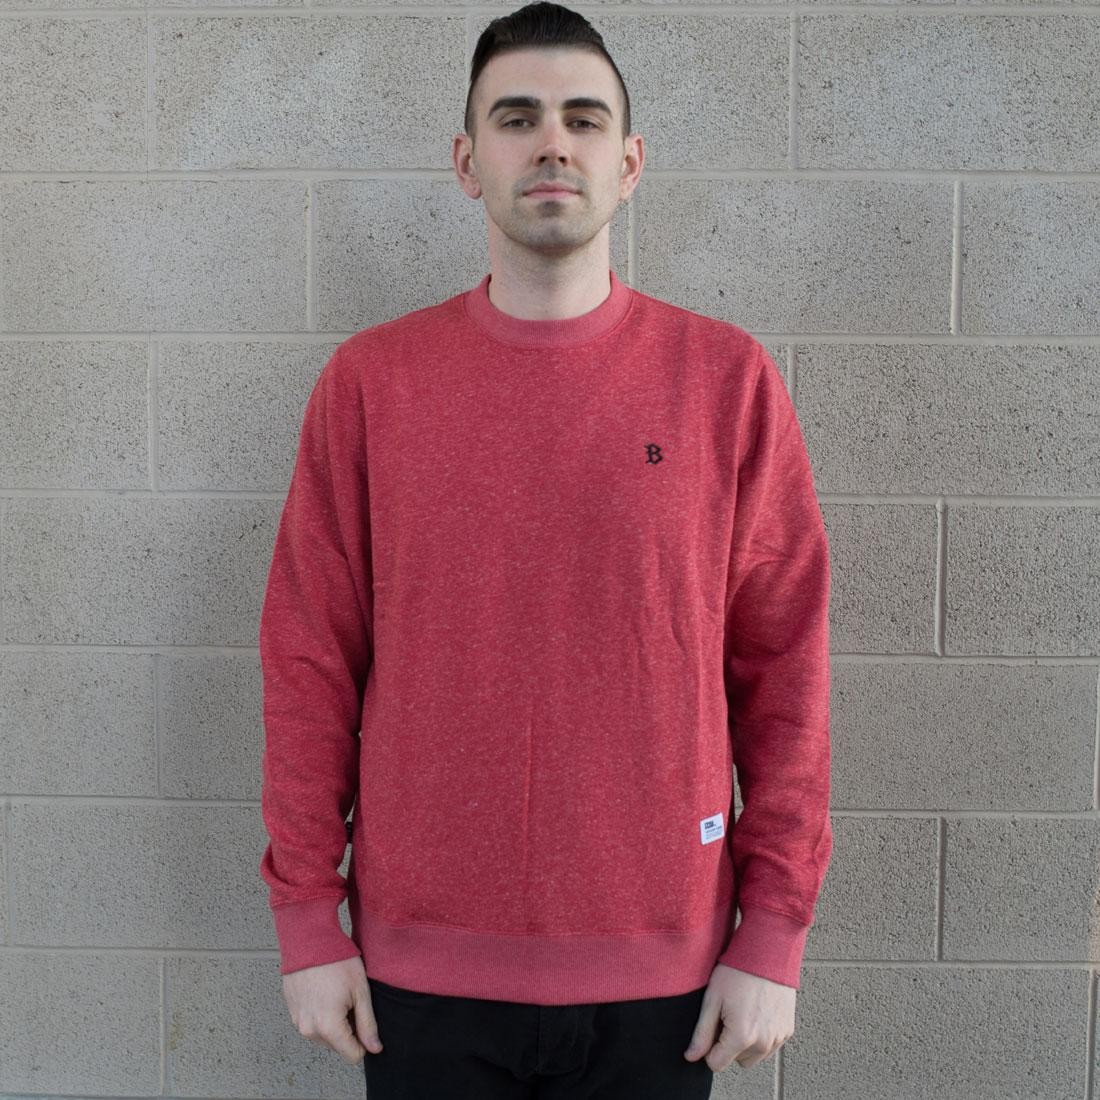 BAIT B Letter Invisible Pockets Fitted Crewneck (red)